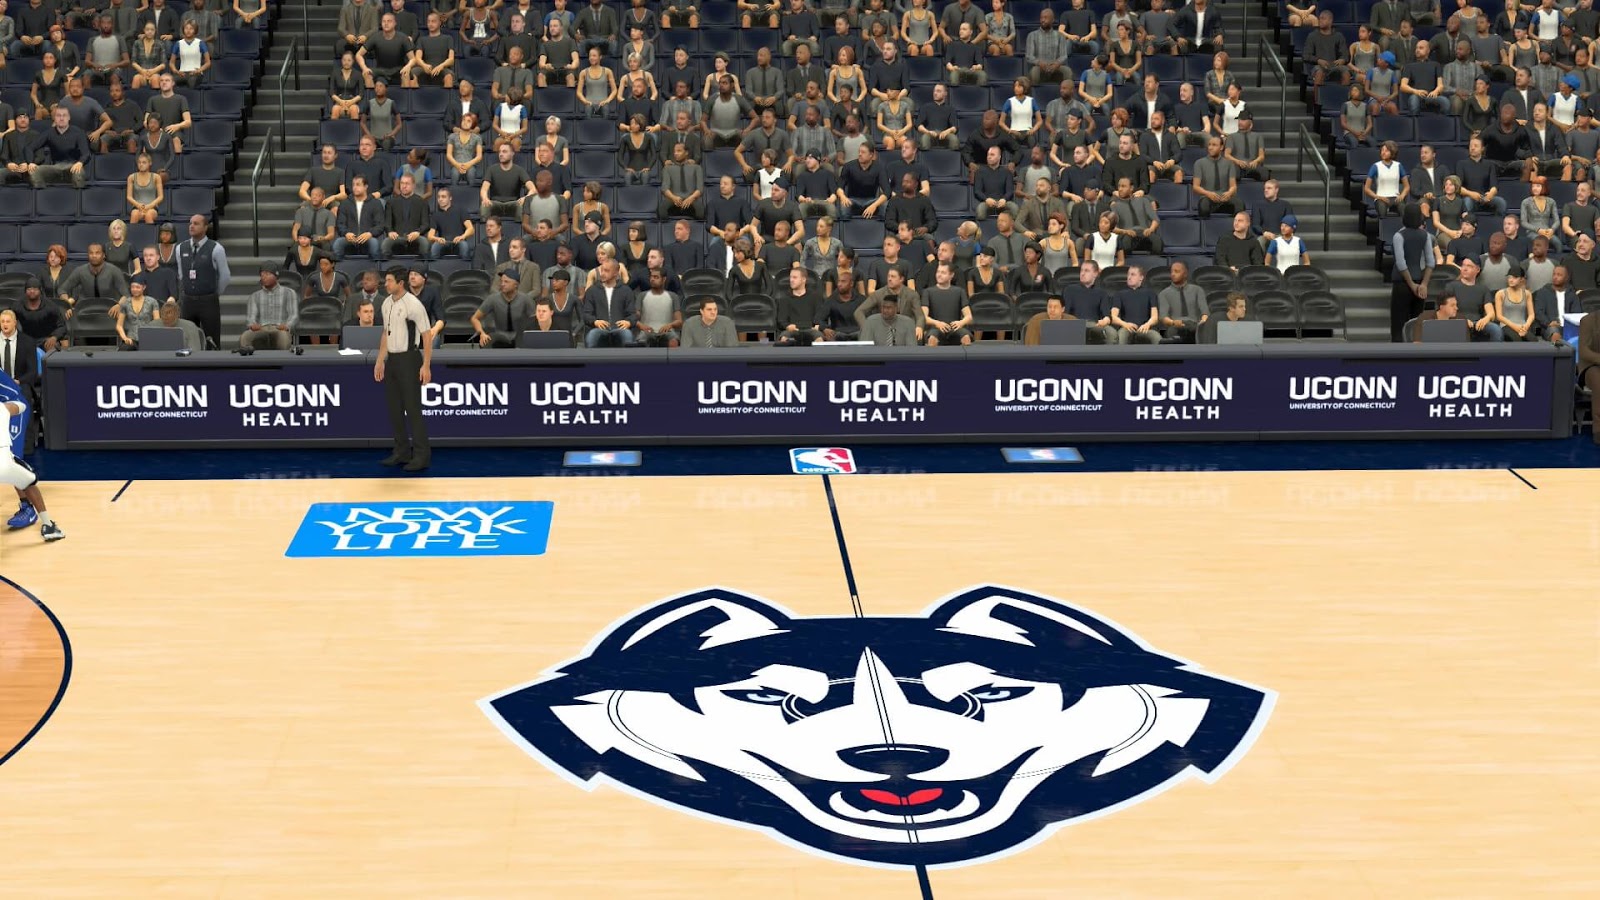 How to Play College basketball in NBA 2k17 : NCAA 2k17 Custom Roster Download (PS4) - HoopsVilla